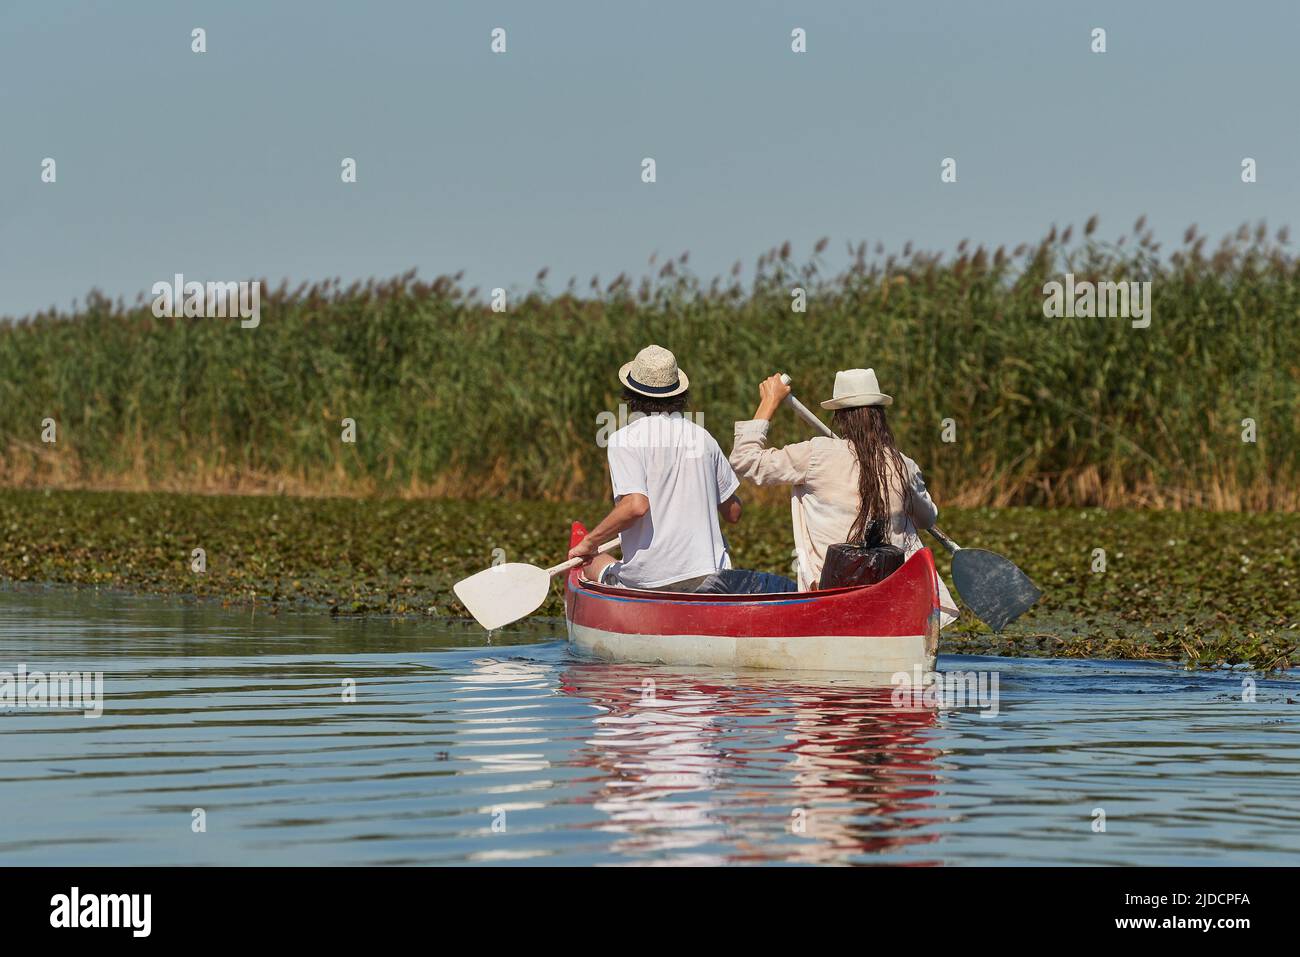 Canoeing in a natural environment Stock Photo